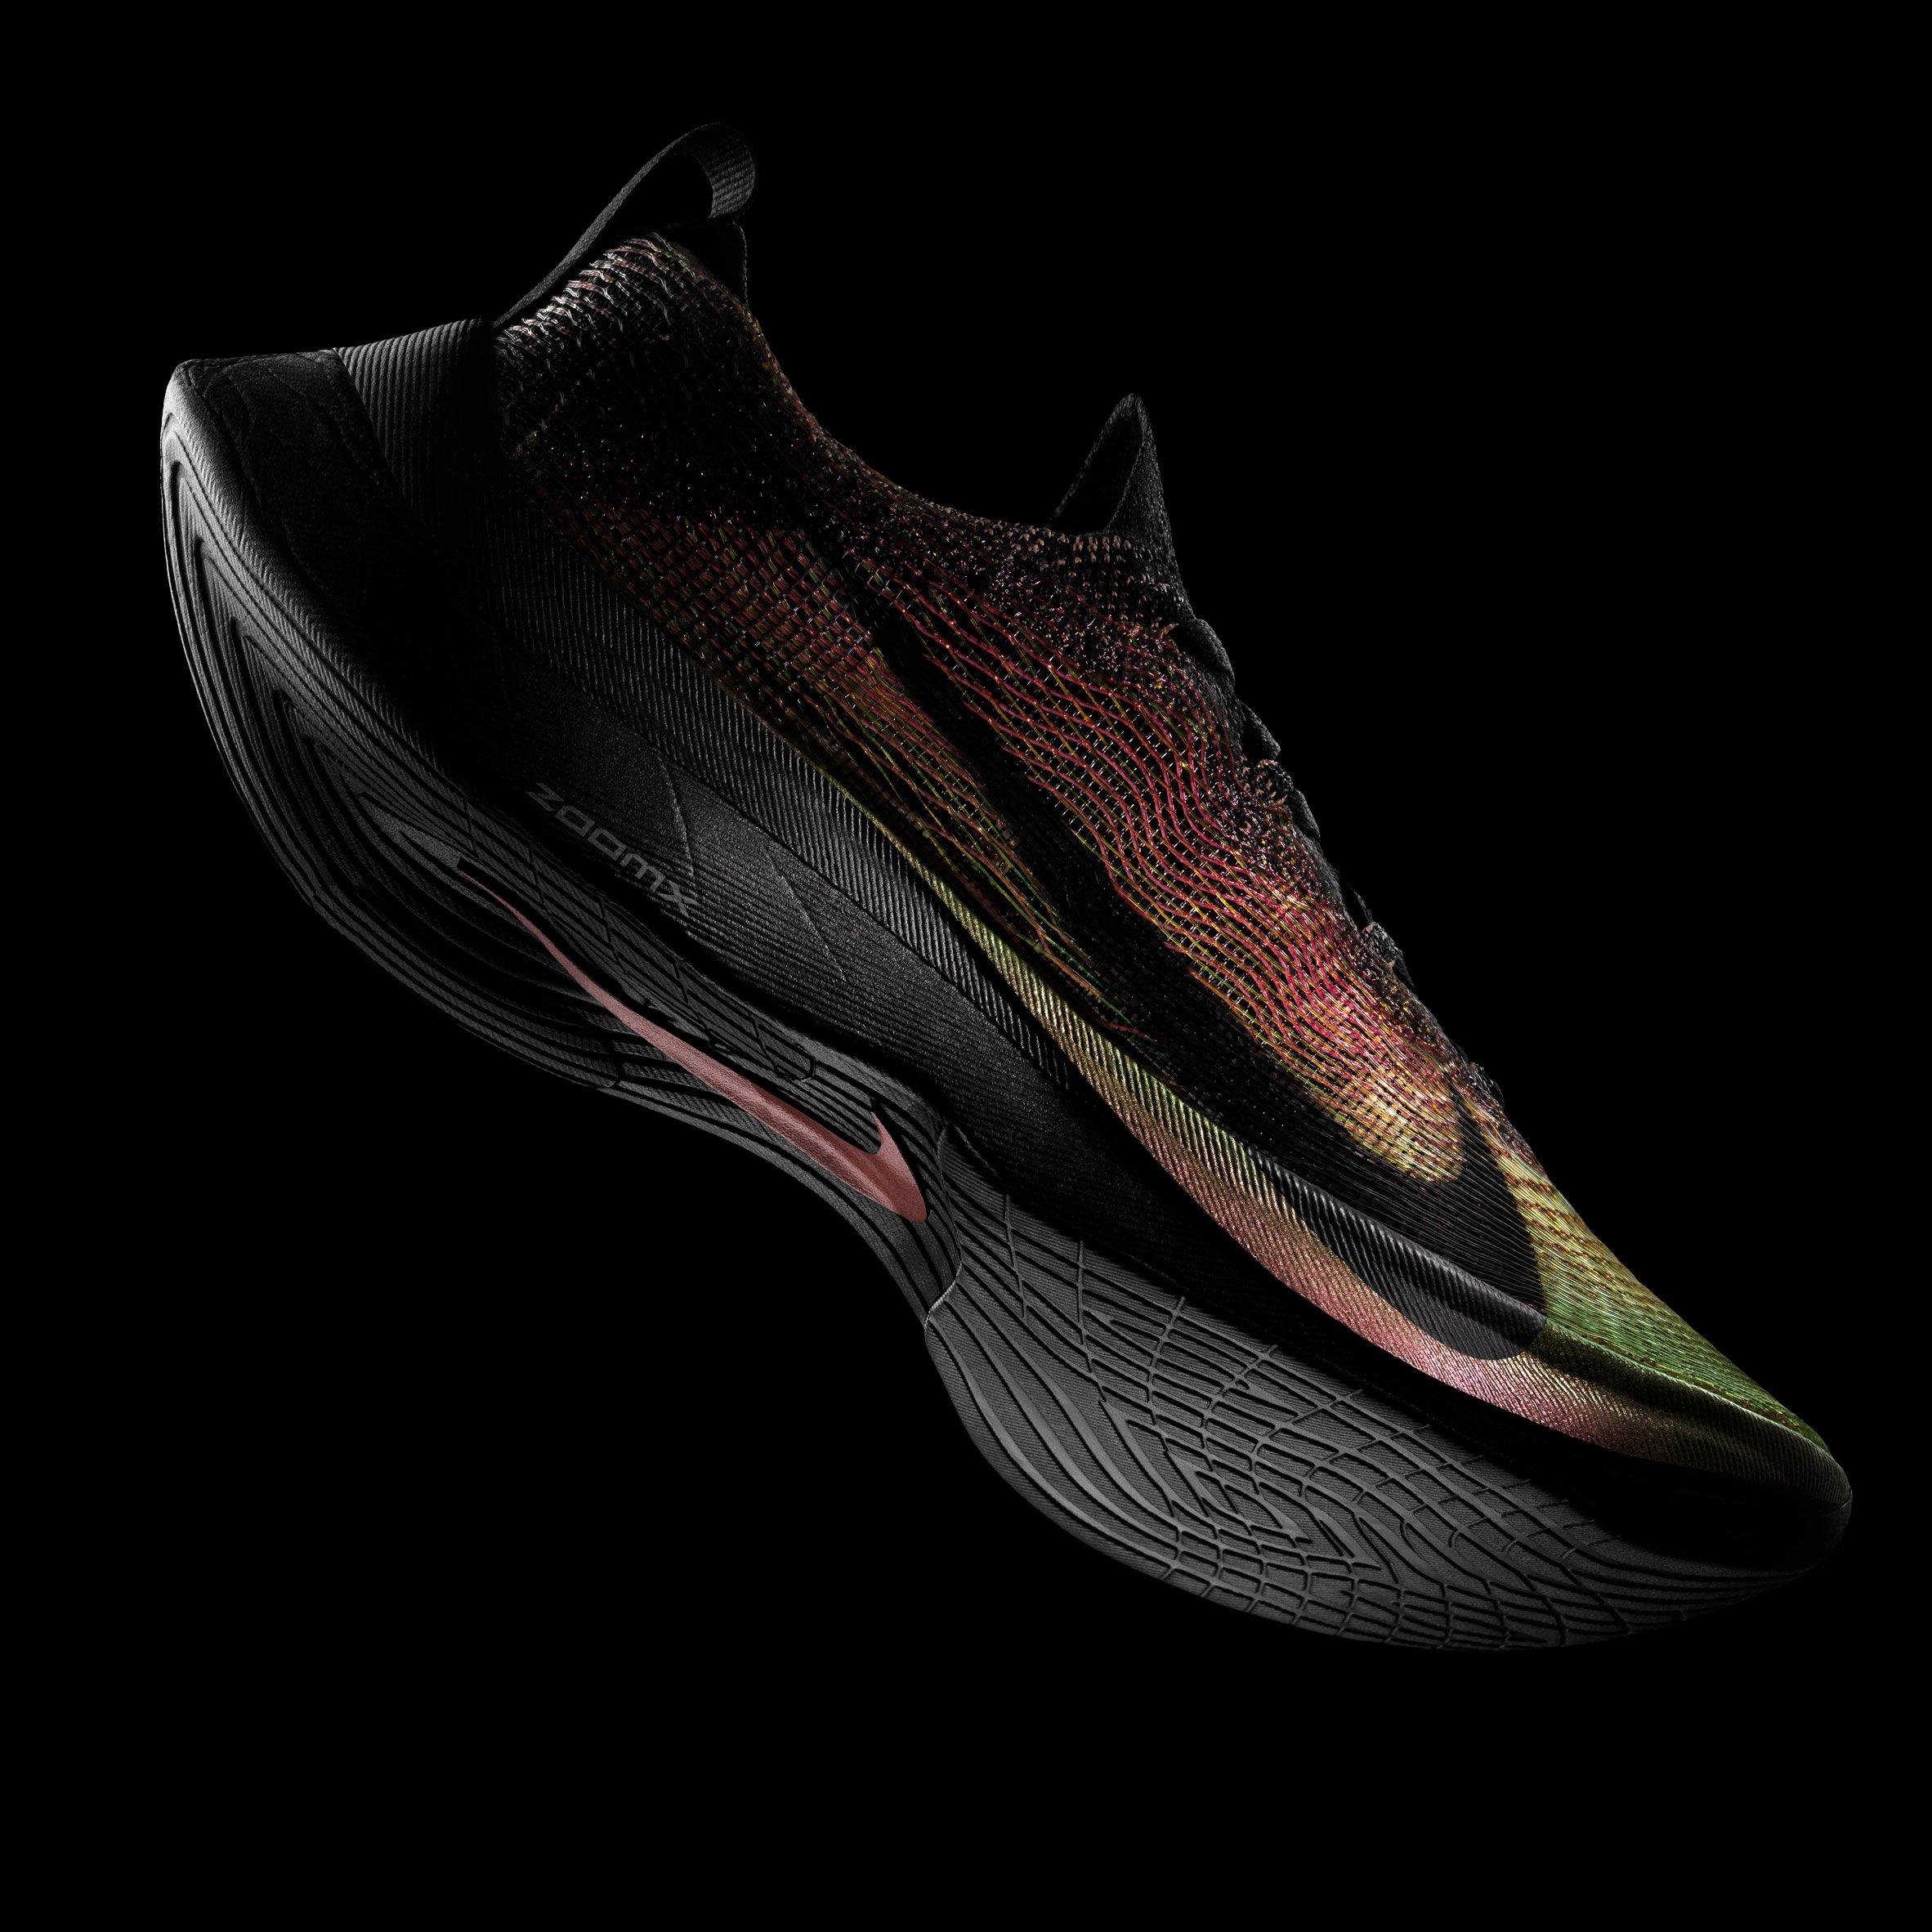 Nike unveils world's first running shoes with 3D-printed uppers